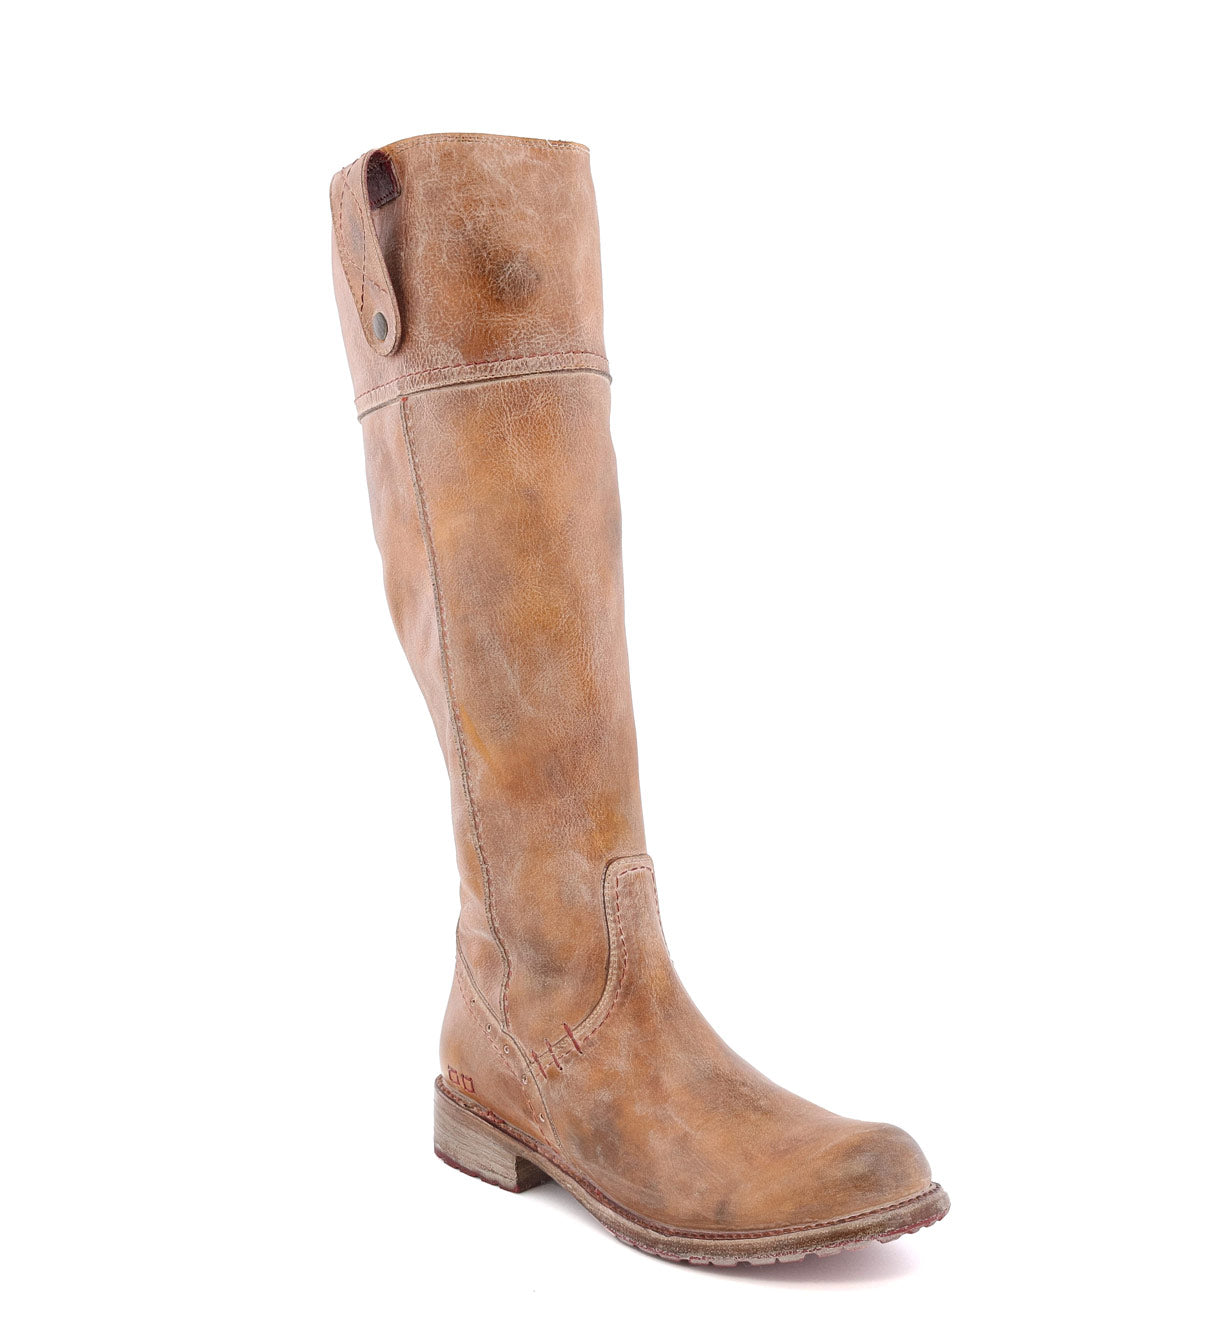 A women's Jacqueline riding boot by Bed Stu on a white background.